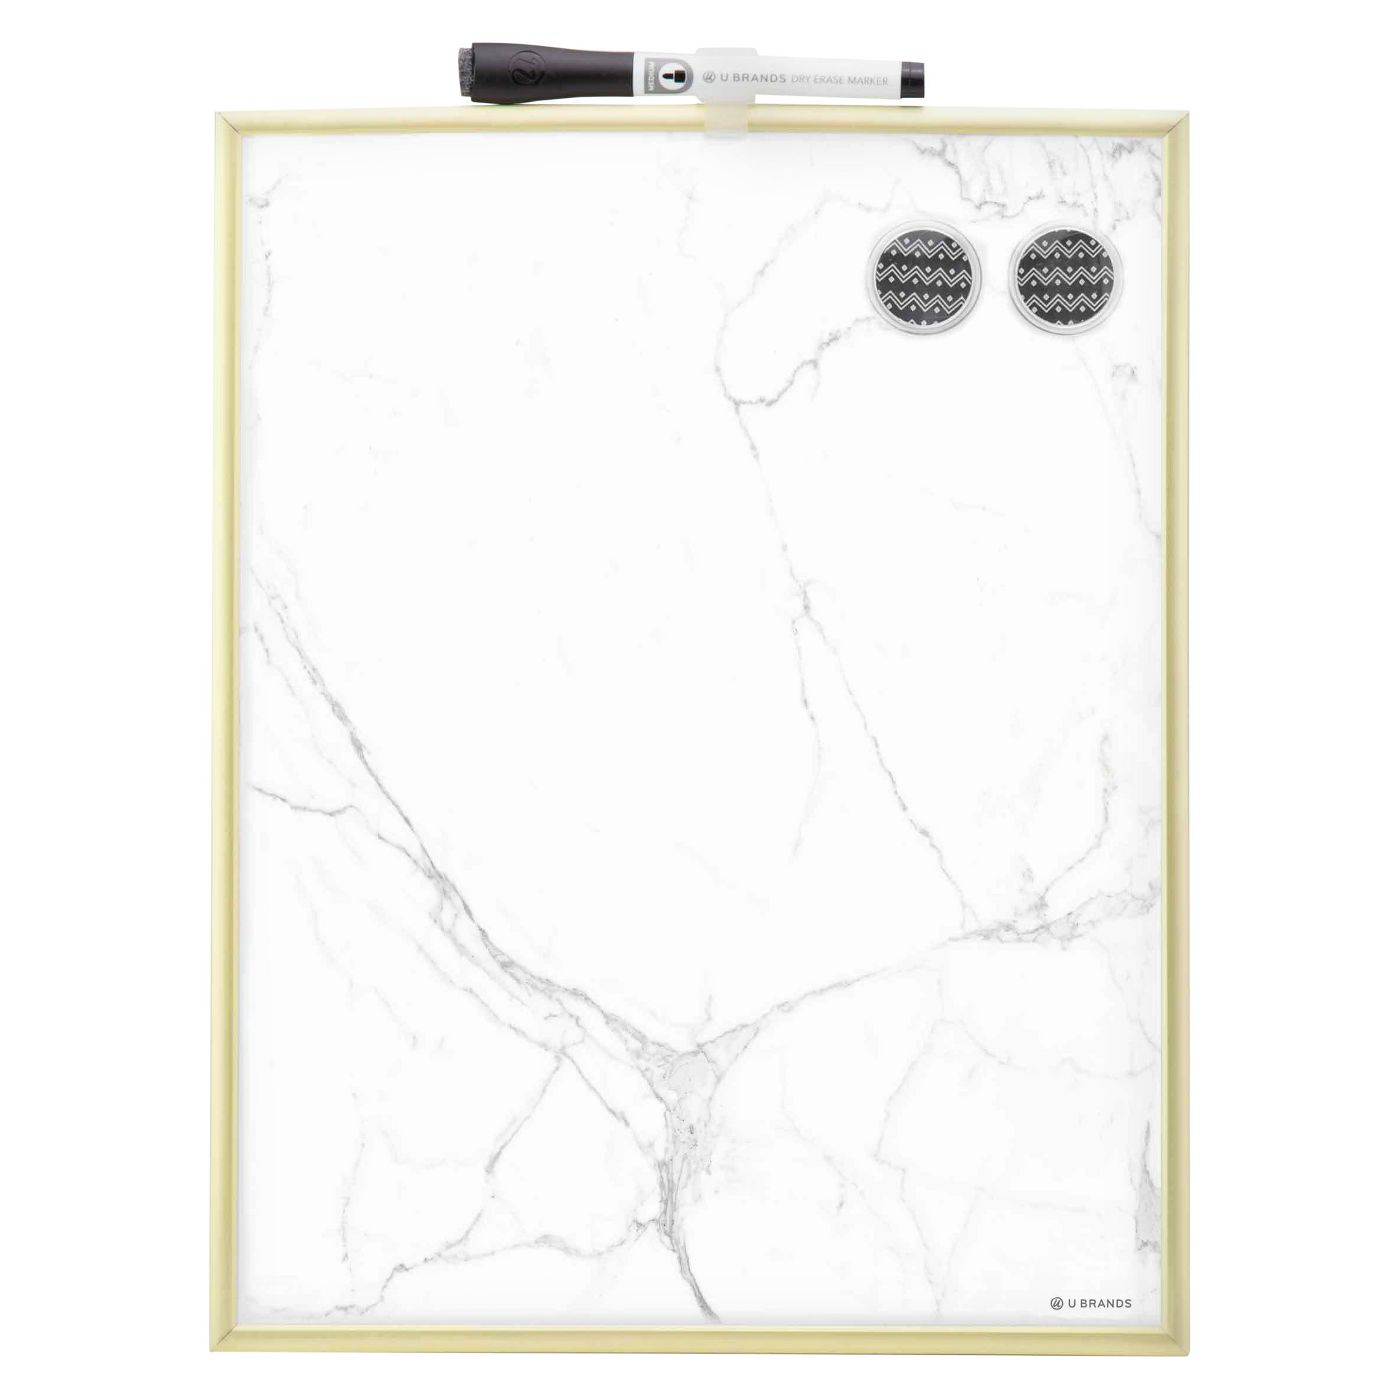 Ubrands® Marble Dry Erase Board Gold Frame 11"x14" White - image 2 of 4